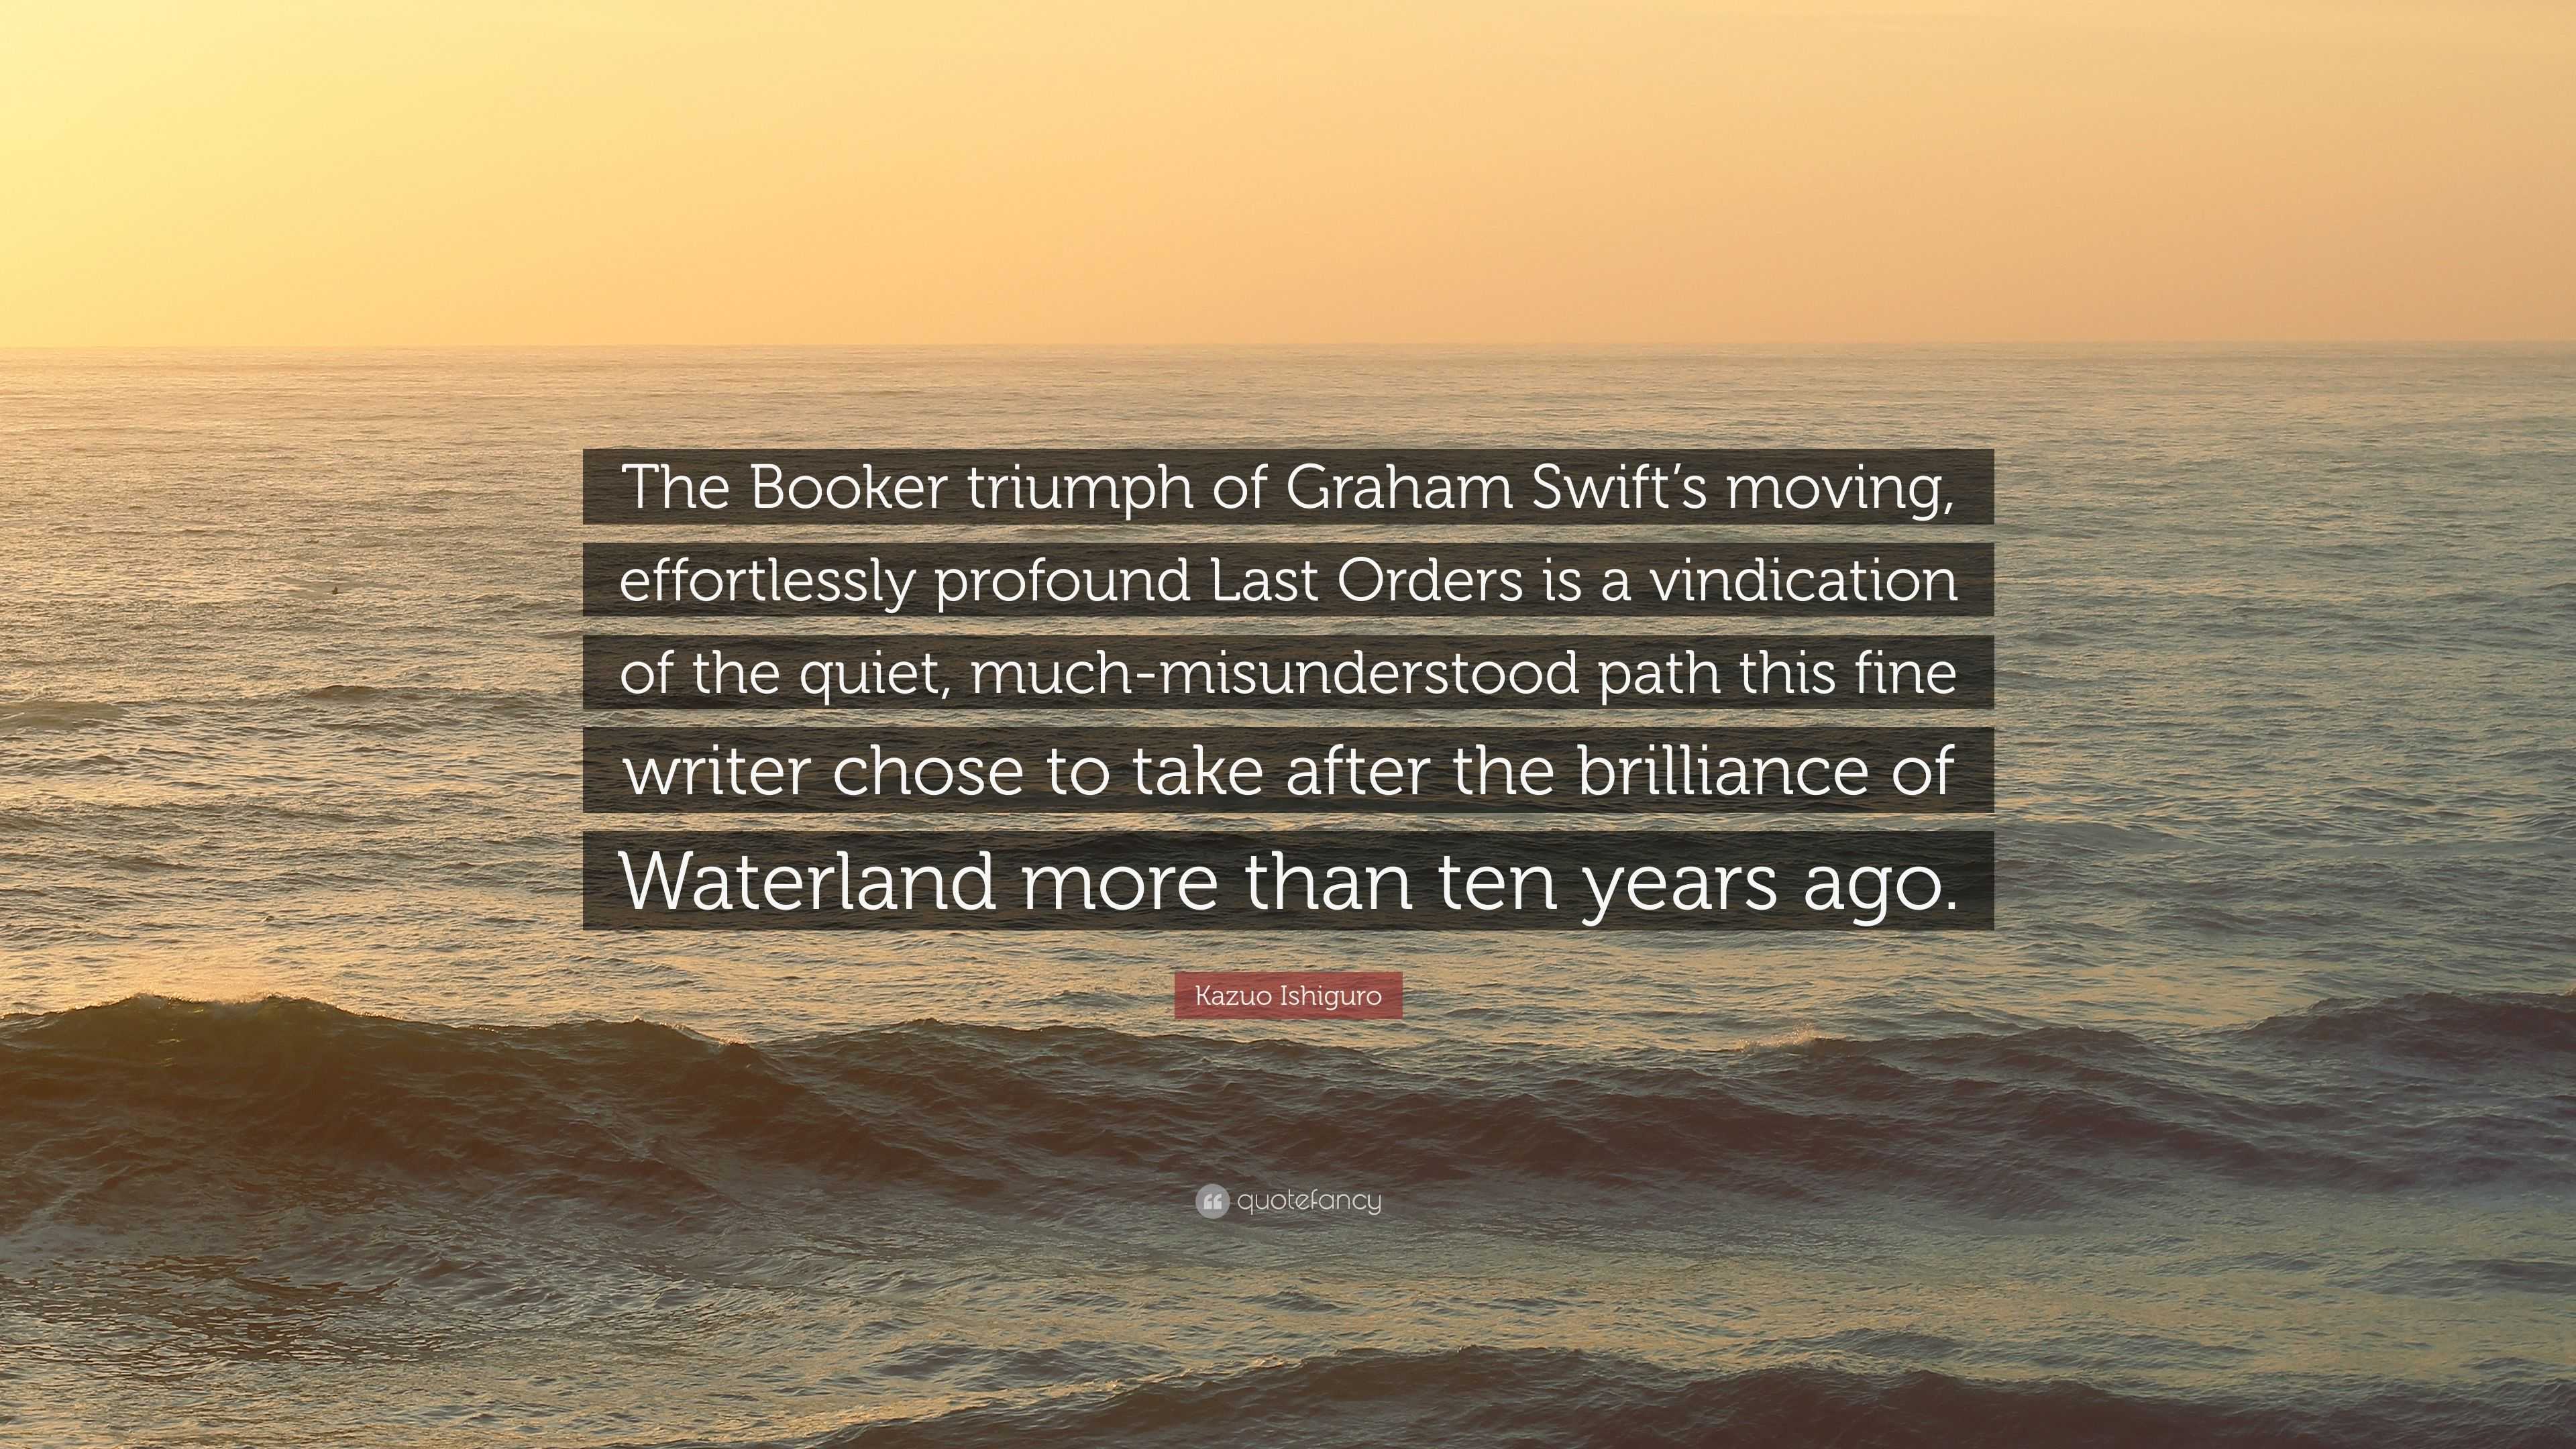 Kazuo Ishiguro Quote The Booker Triumph Of Graham Swift S Moving Effortlessly Profound Last Orders Is A Vindication Of The Quiet Much Misun 7 Wallpapers Quotefancy